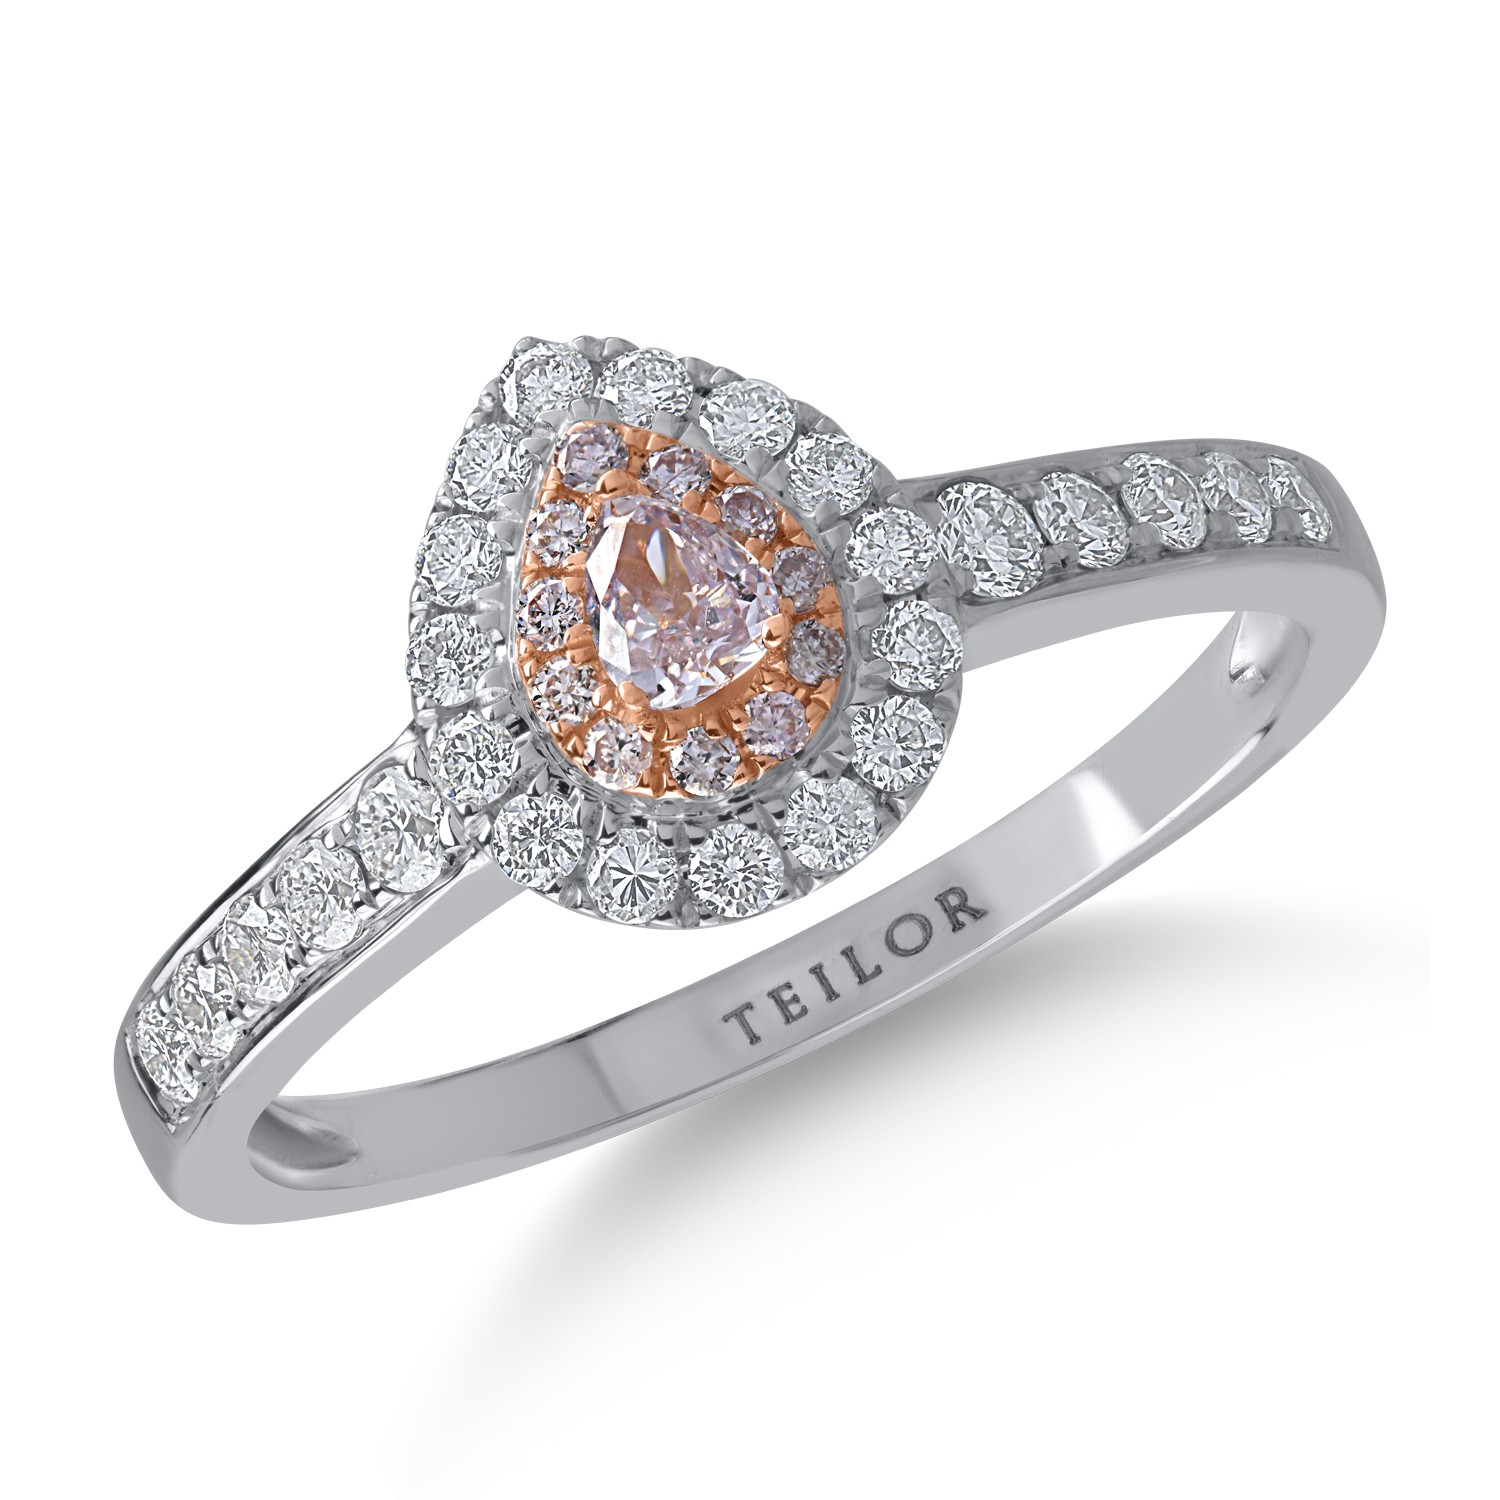 White-rose gold ring with 0.35ct clear diamonds and 0.16ct rose diamonds